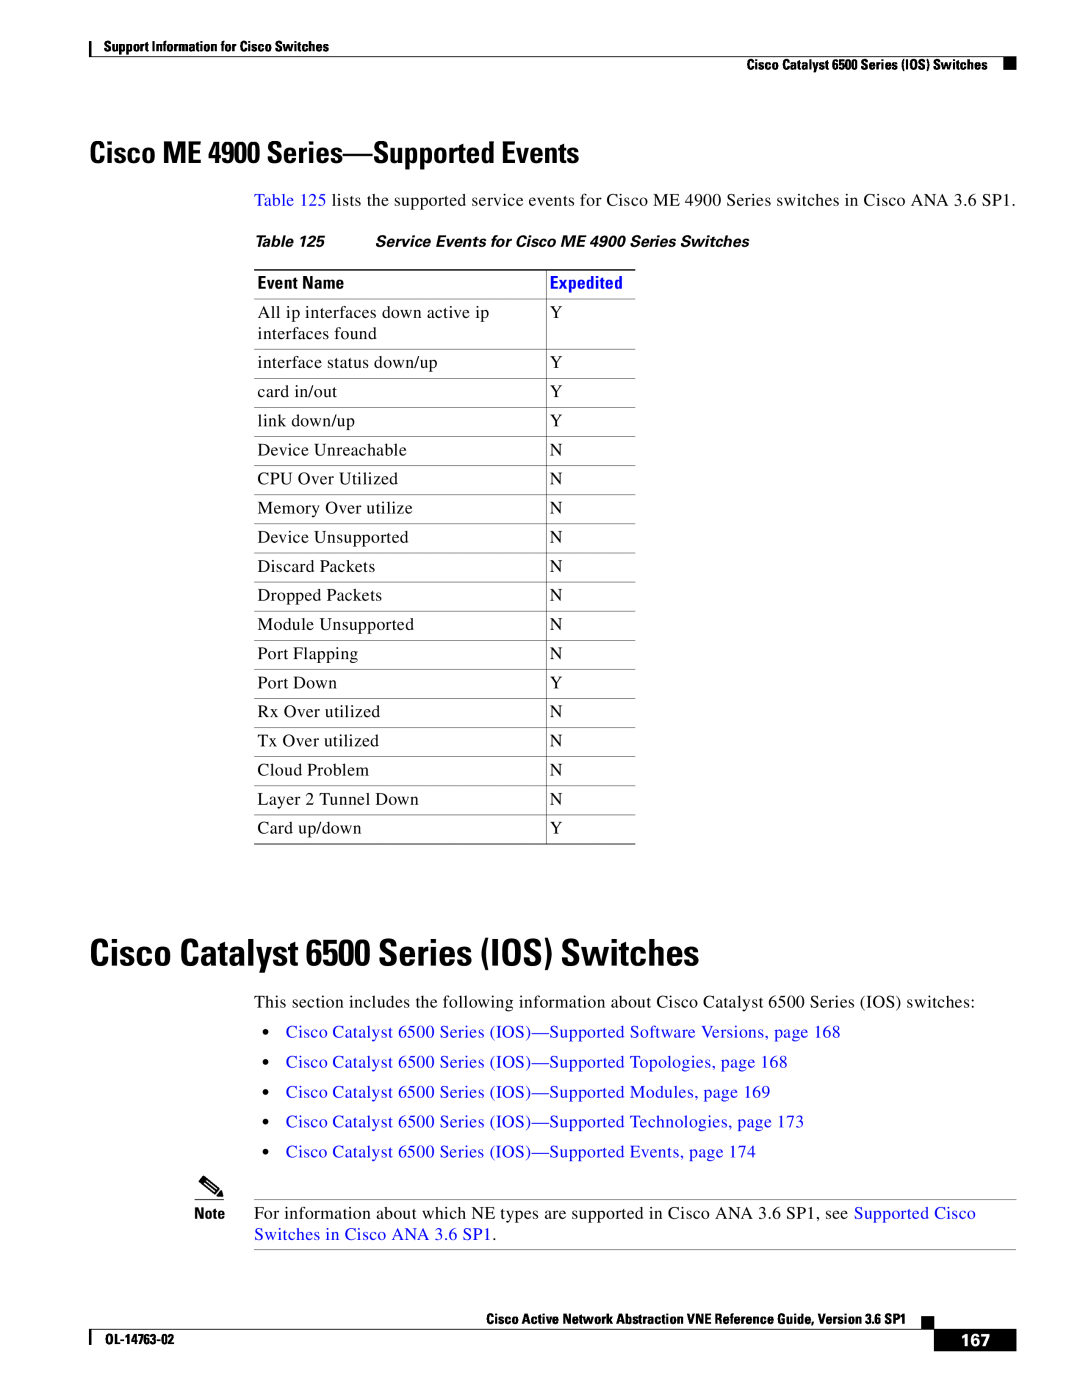 Cisco Systems OL-14763-02 manual Cisco Catalyst 6500 Series IOS Switches, Cisco ME 4900 Series-Supported Events, Event Name 